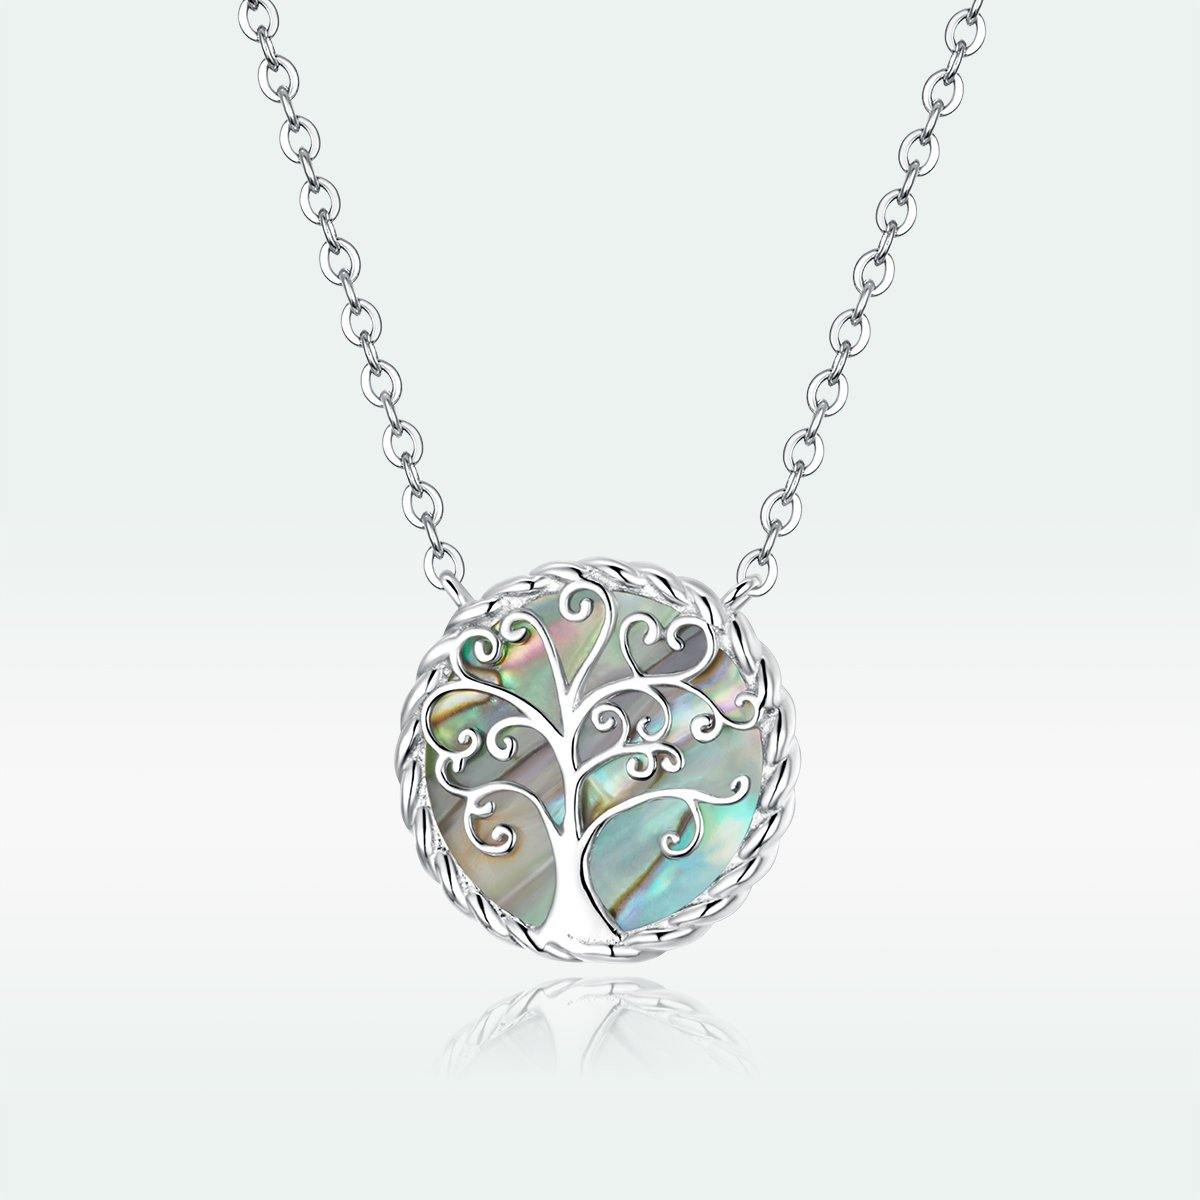 Colorful Tree of Life 925 Sterling Silver Necklace - Aisllin Jewelry